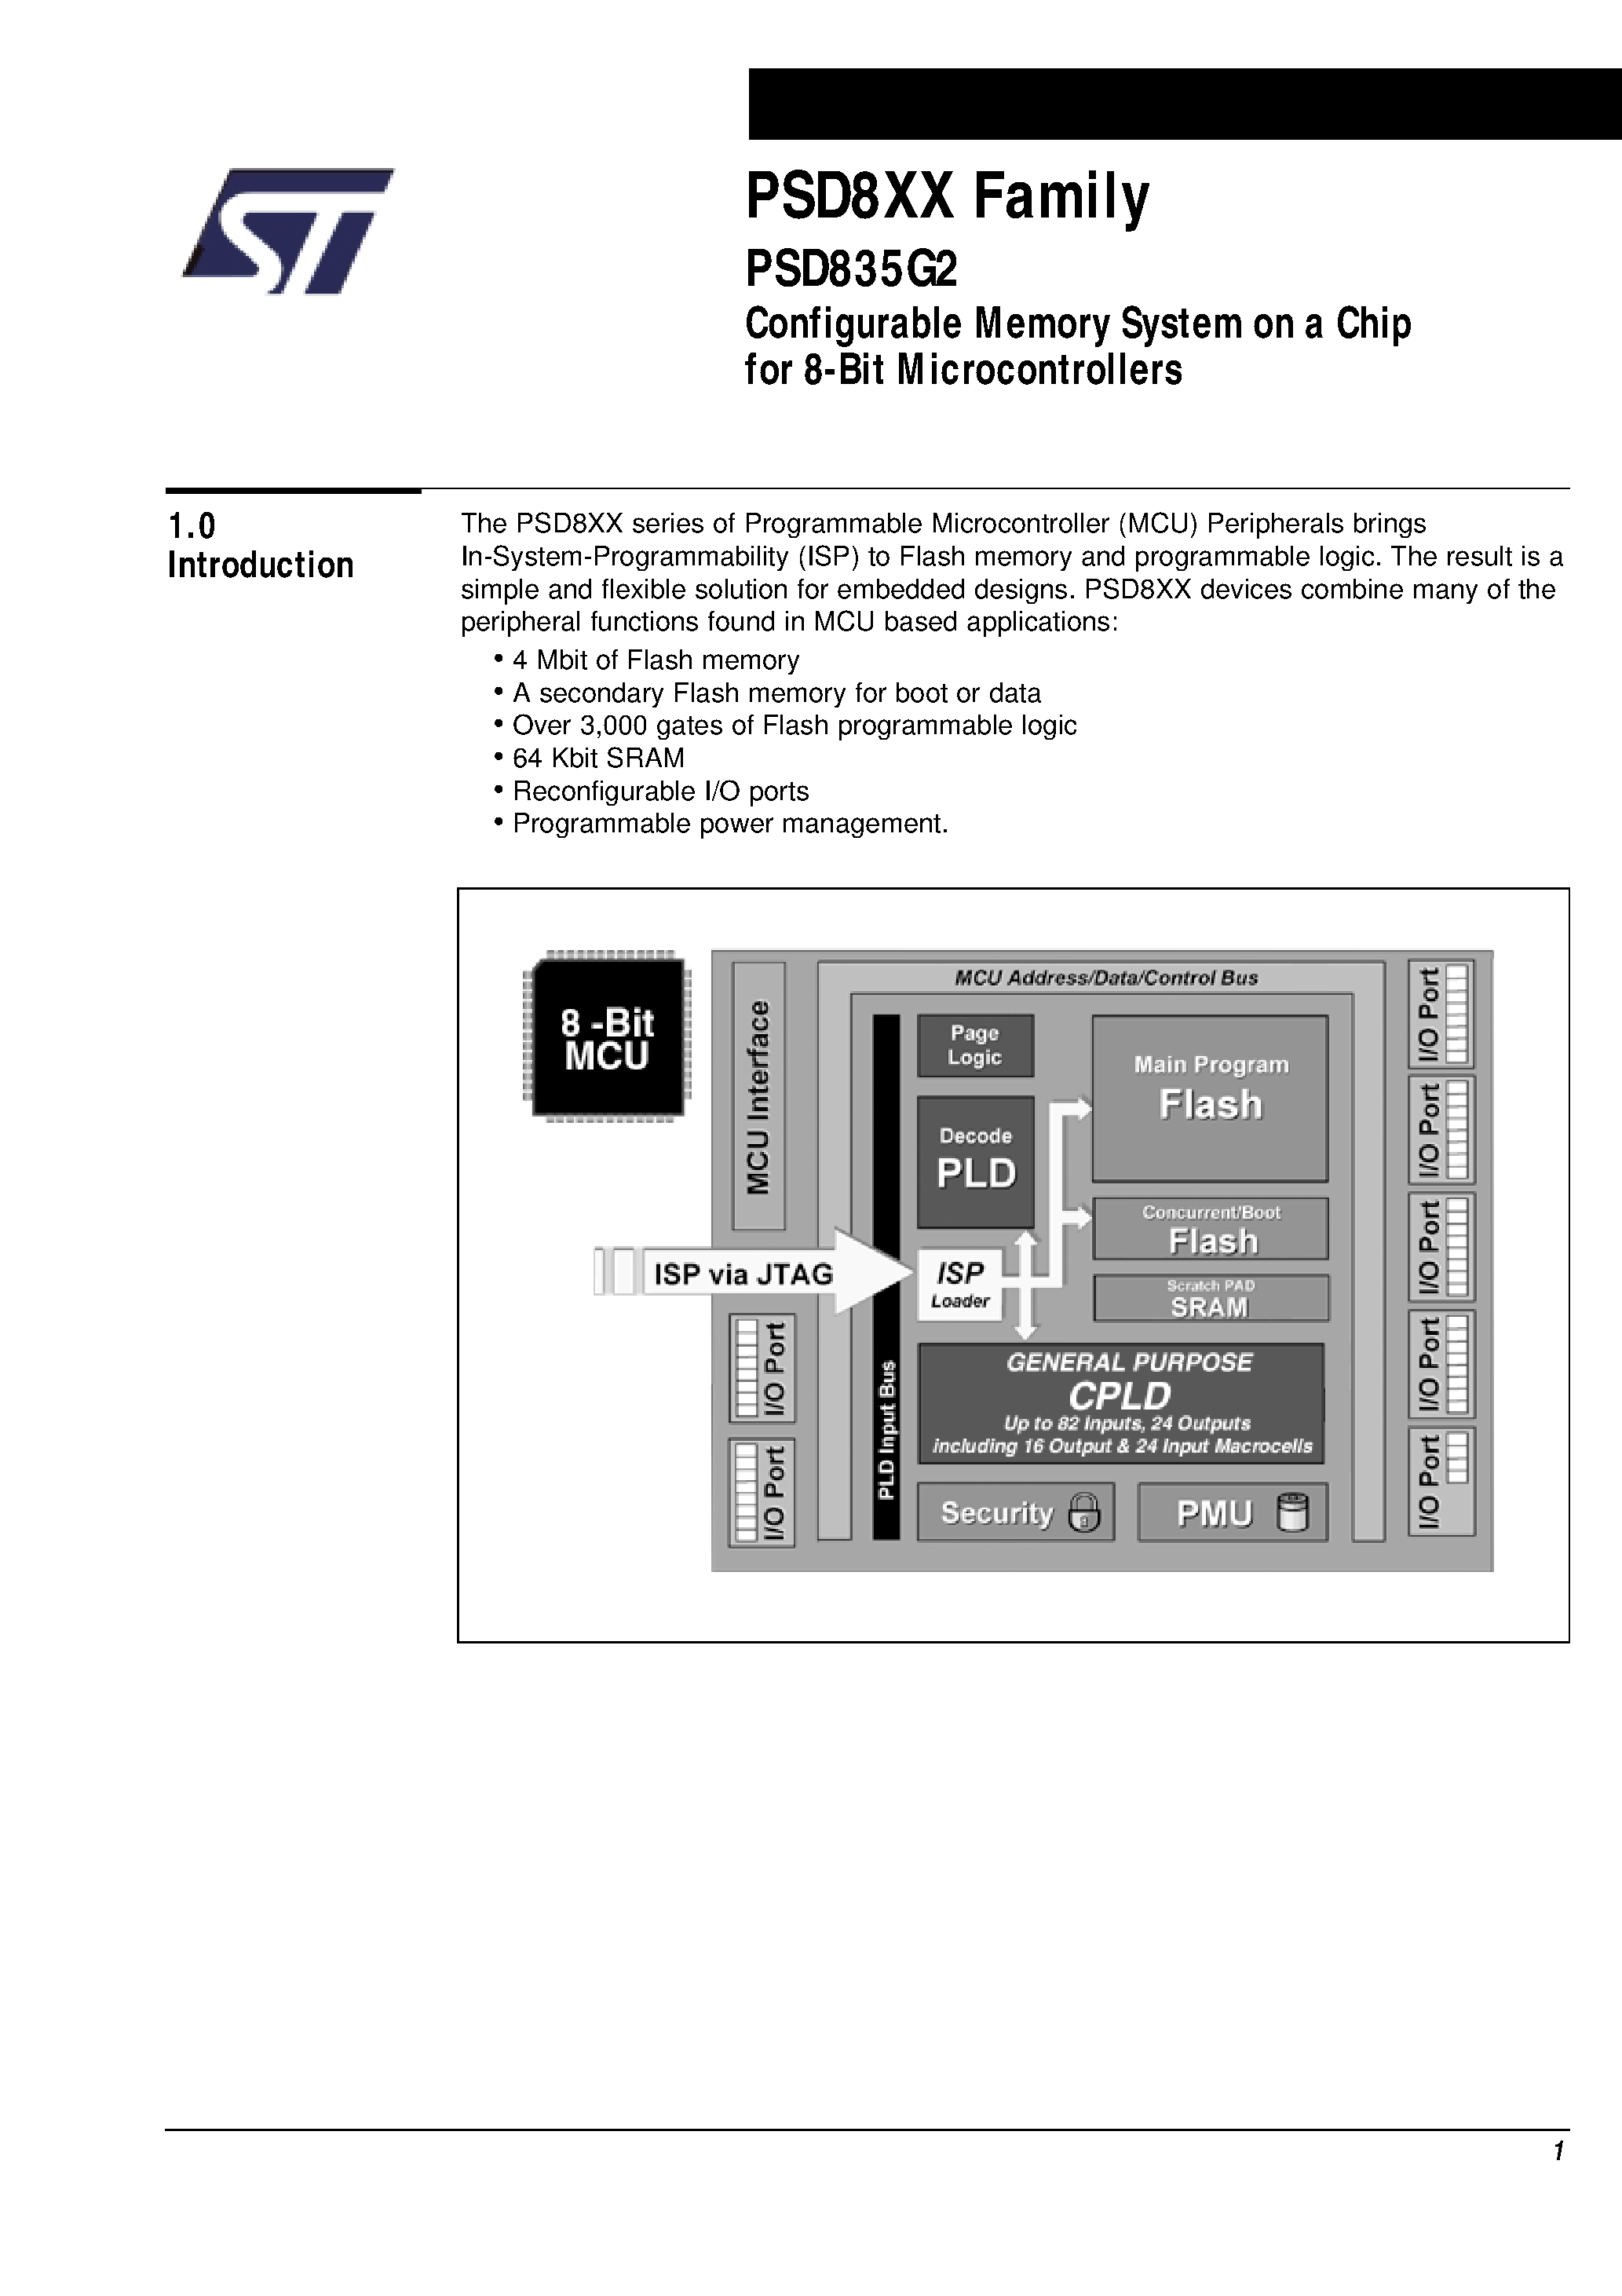 Datasheet PSD835F2V-A-12B81I - Configurable Memory System on a Chip for 8-Bit Microcontrollers page 2